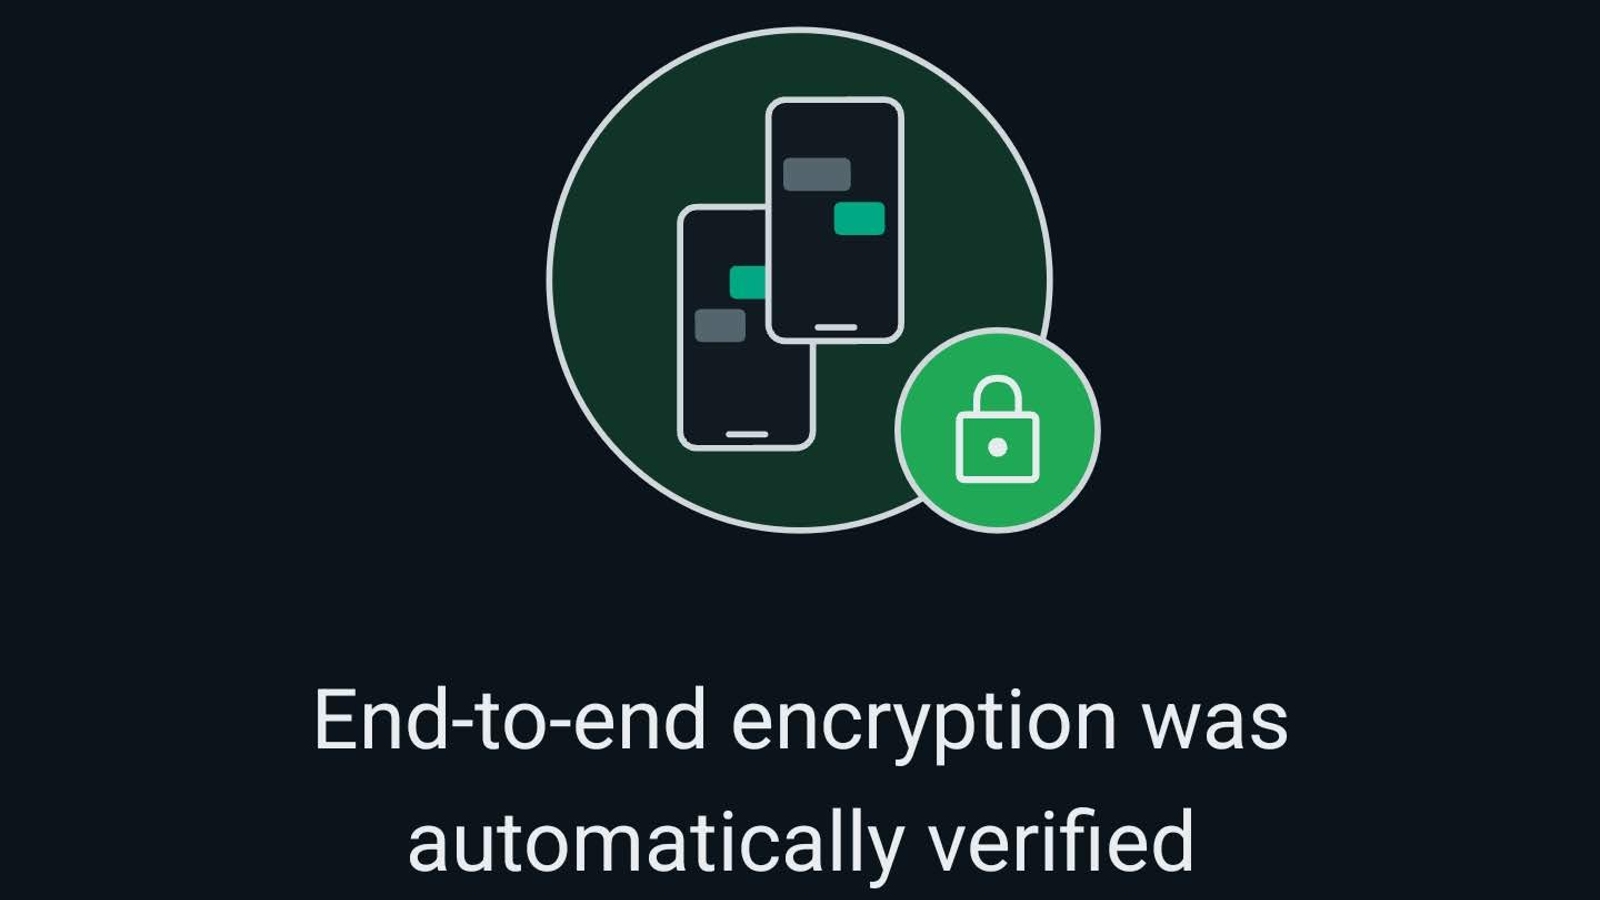 WhatsApp now shows “End-to-End Encrypted” badge for secure chats | Technology News